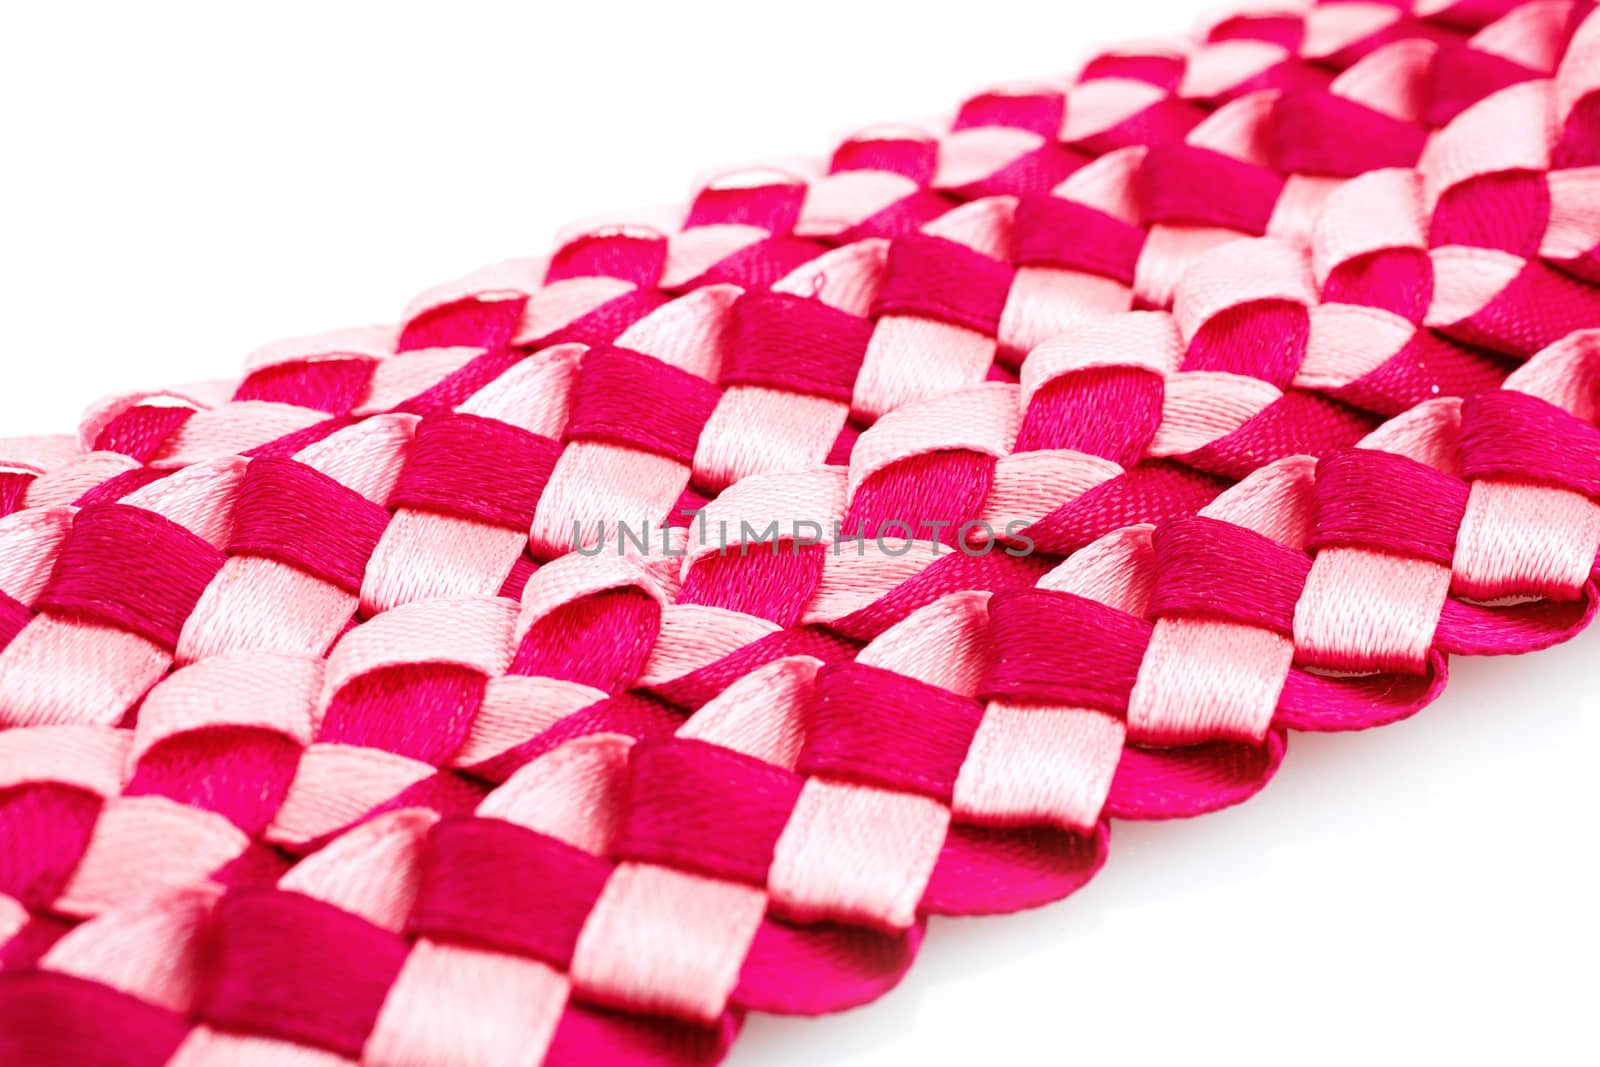 intertwined red fabric texture